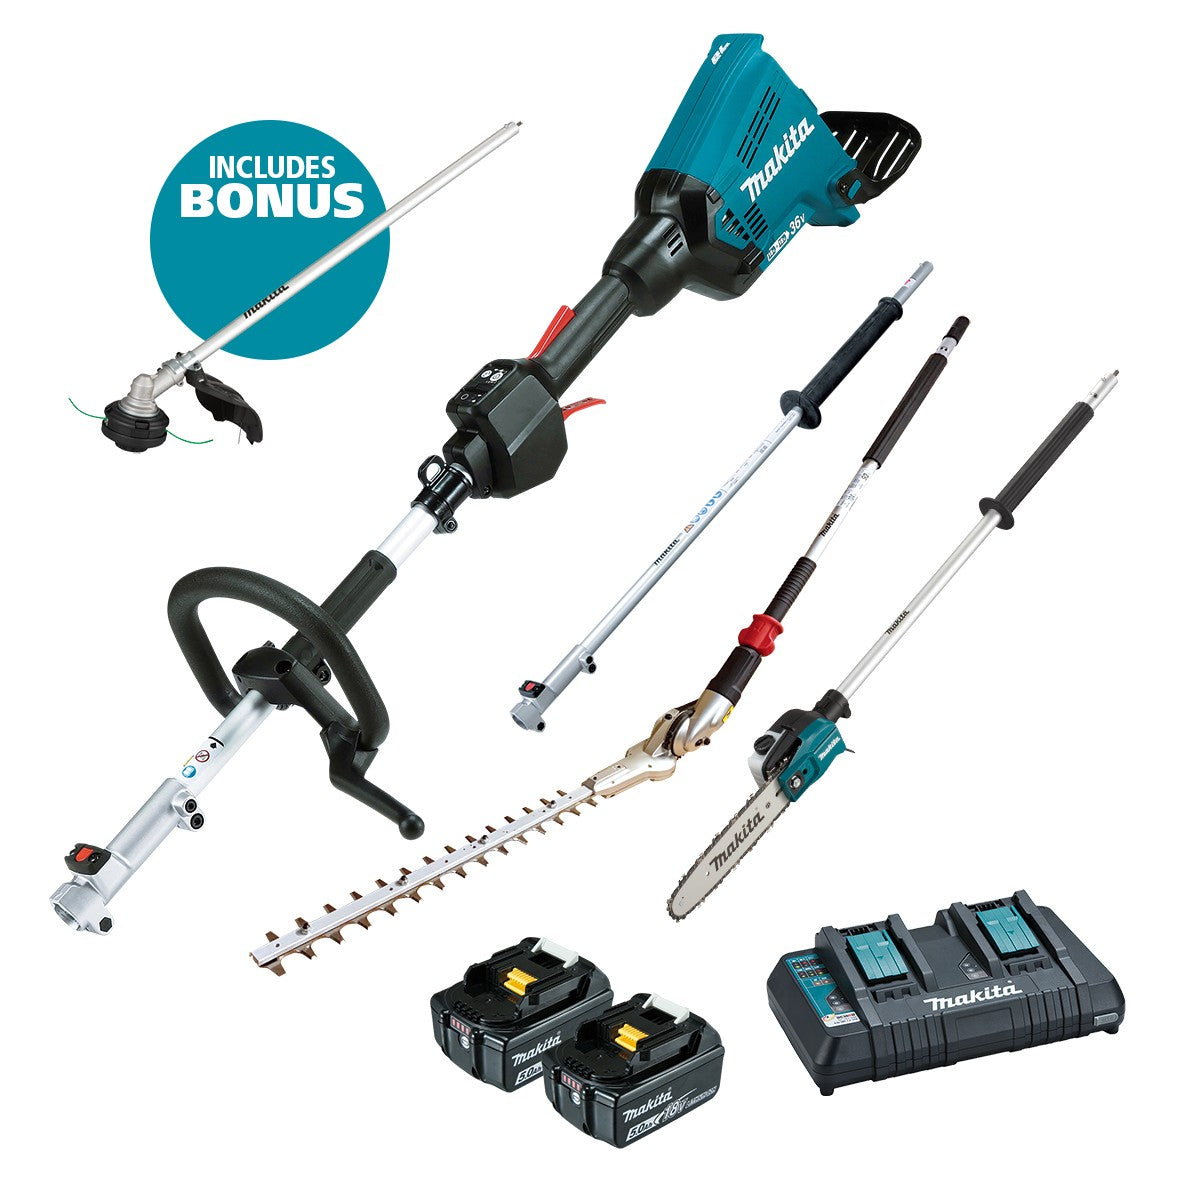 18Vx2 5.0Ah Brushless Multi-Function Powerhead, Ext Pole, Hedge Trimmer & Pole Saw Kit DUX60PSHPT2-B by Makita